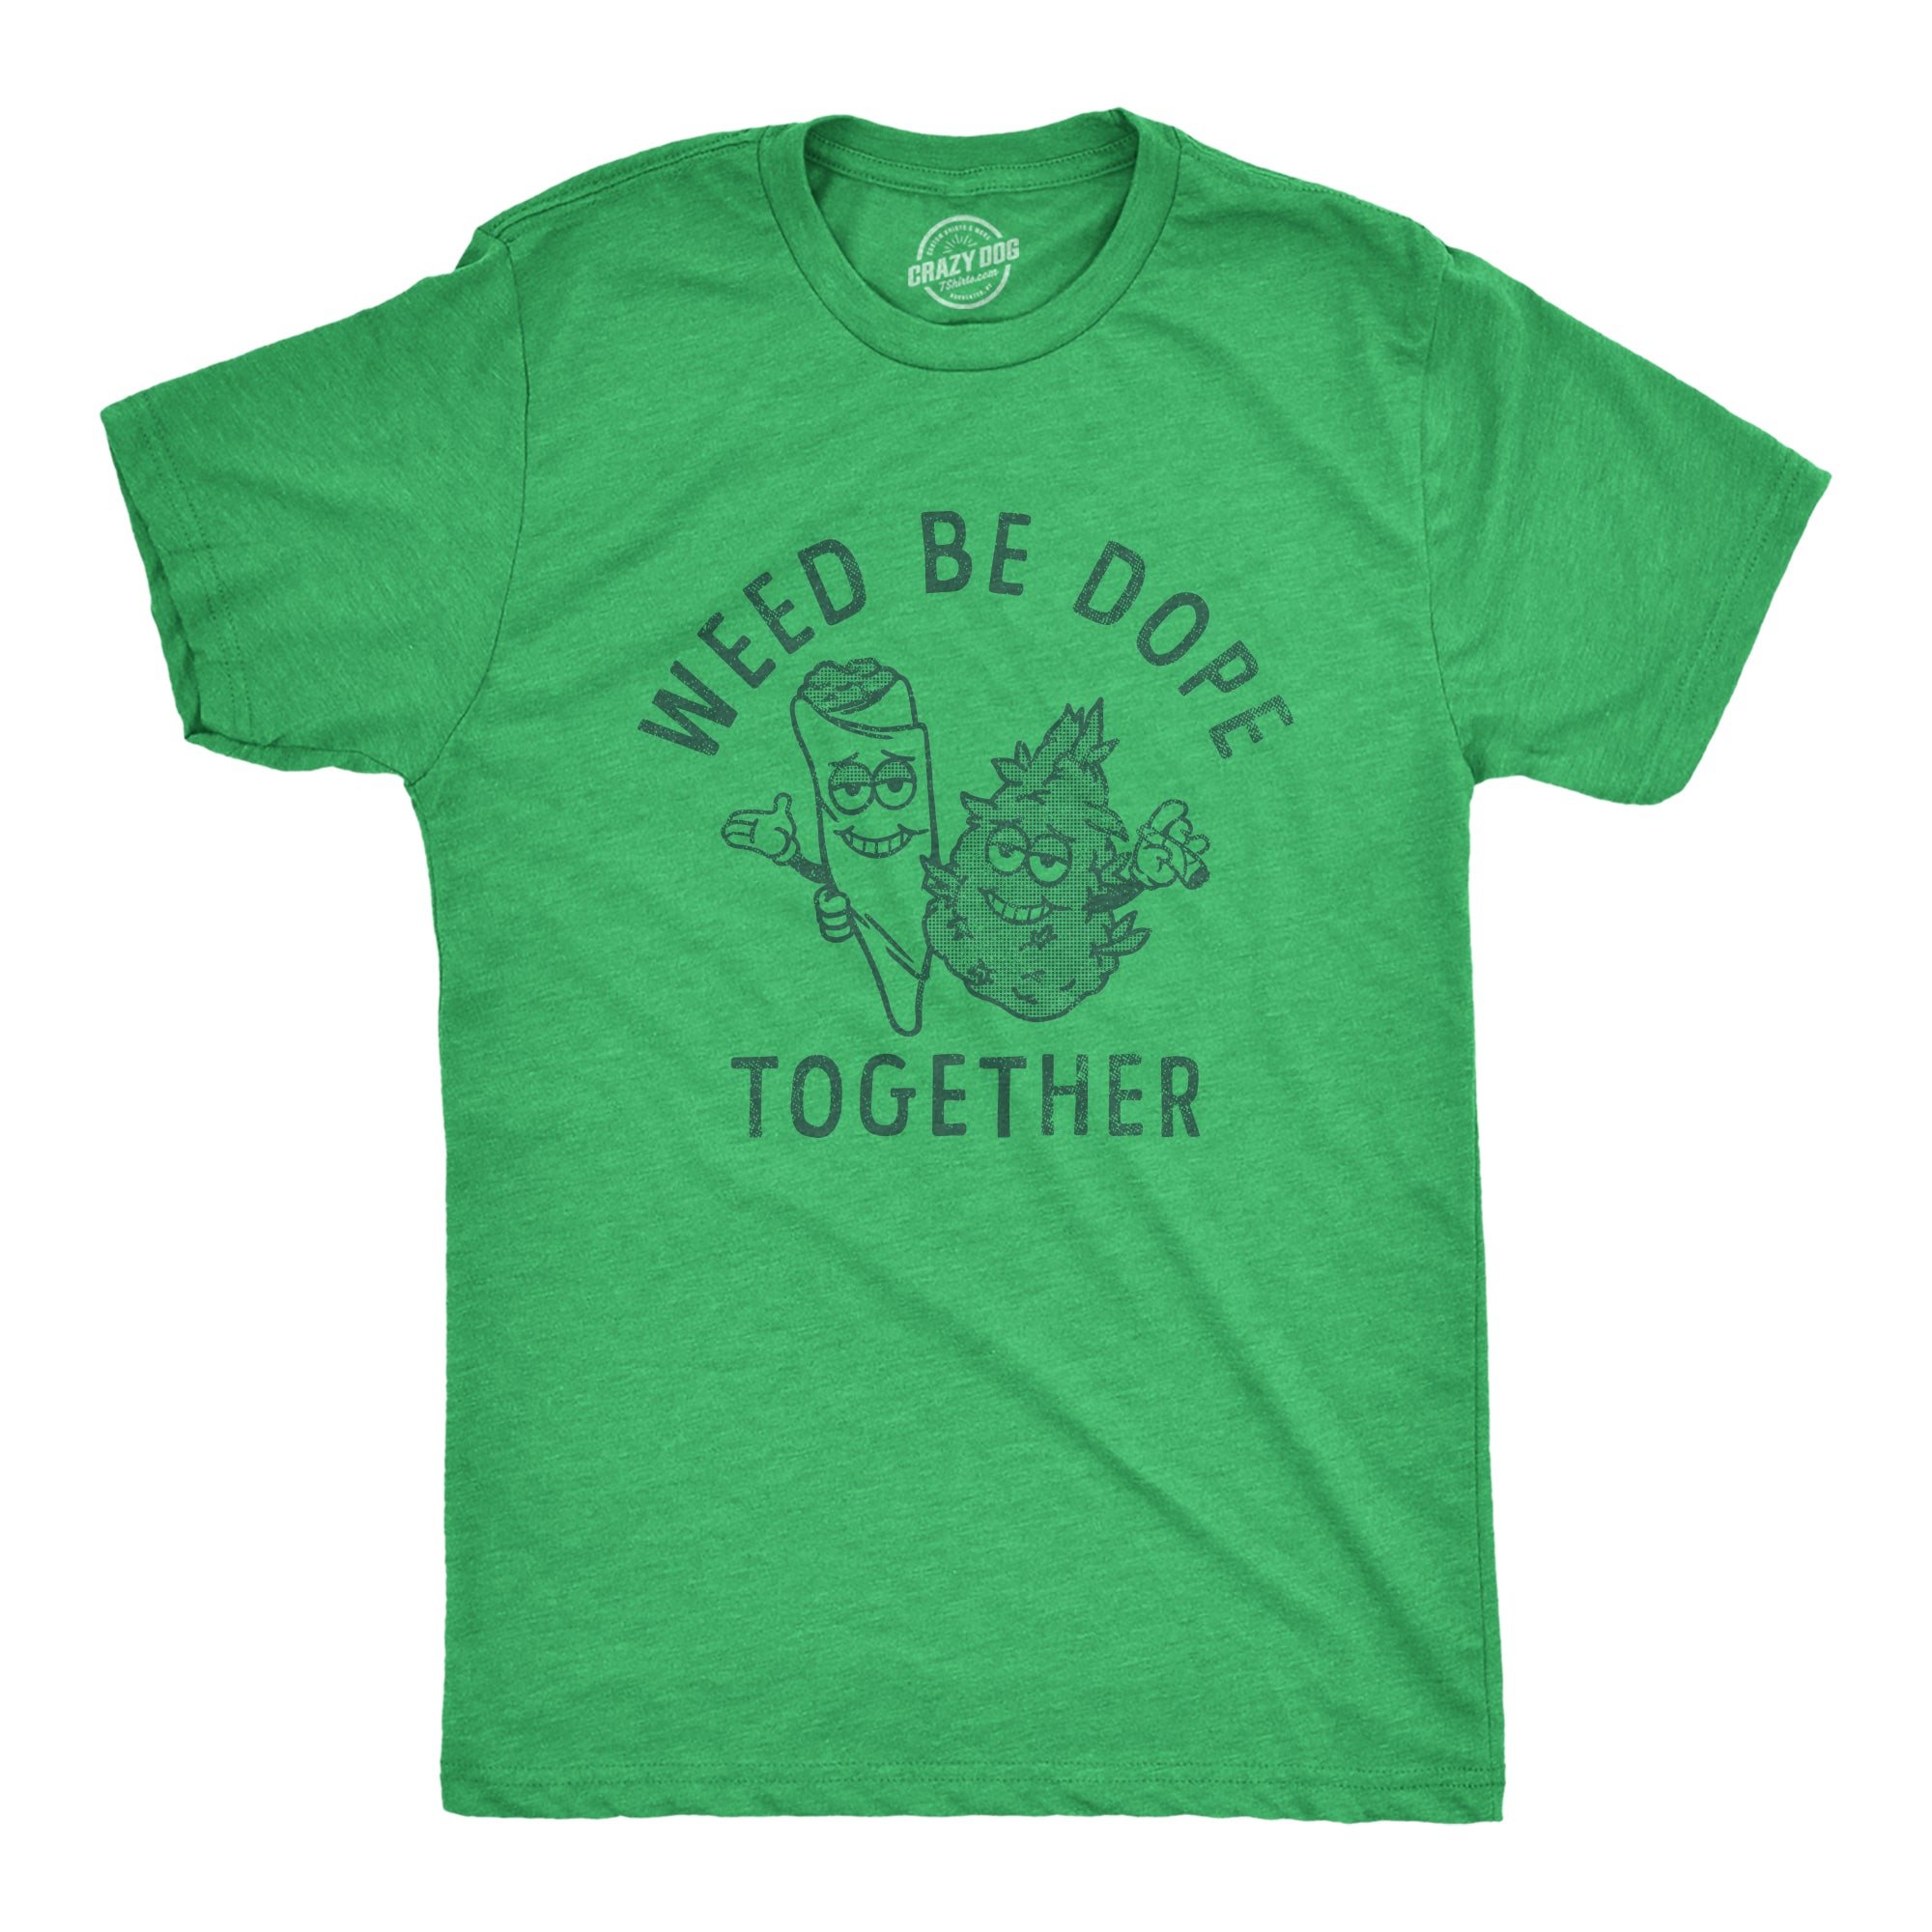 Funny Heather Green - DOPE Weed Be Dope Together Mens T Shirt Nerdy 420 Tee